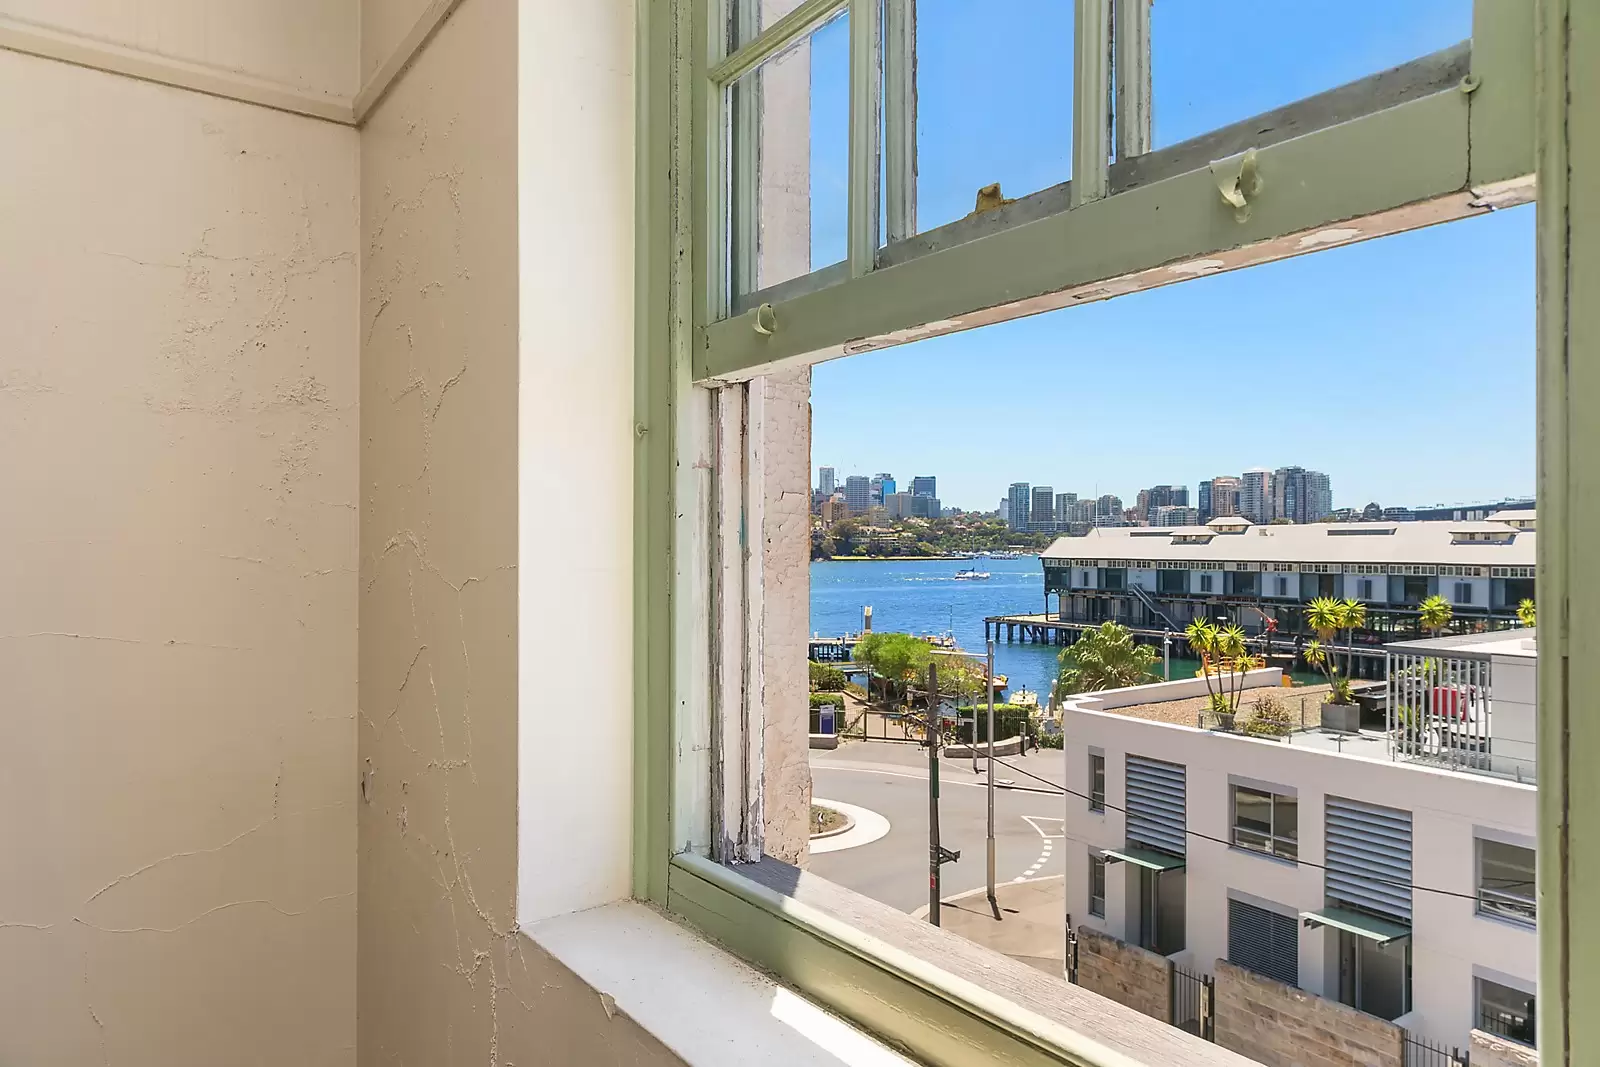 Photo #8: 11-13A Dalgety Road, Millers Point - Sold by Sydney Sotheby's International Realty